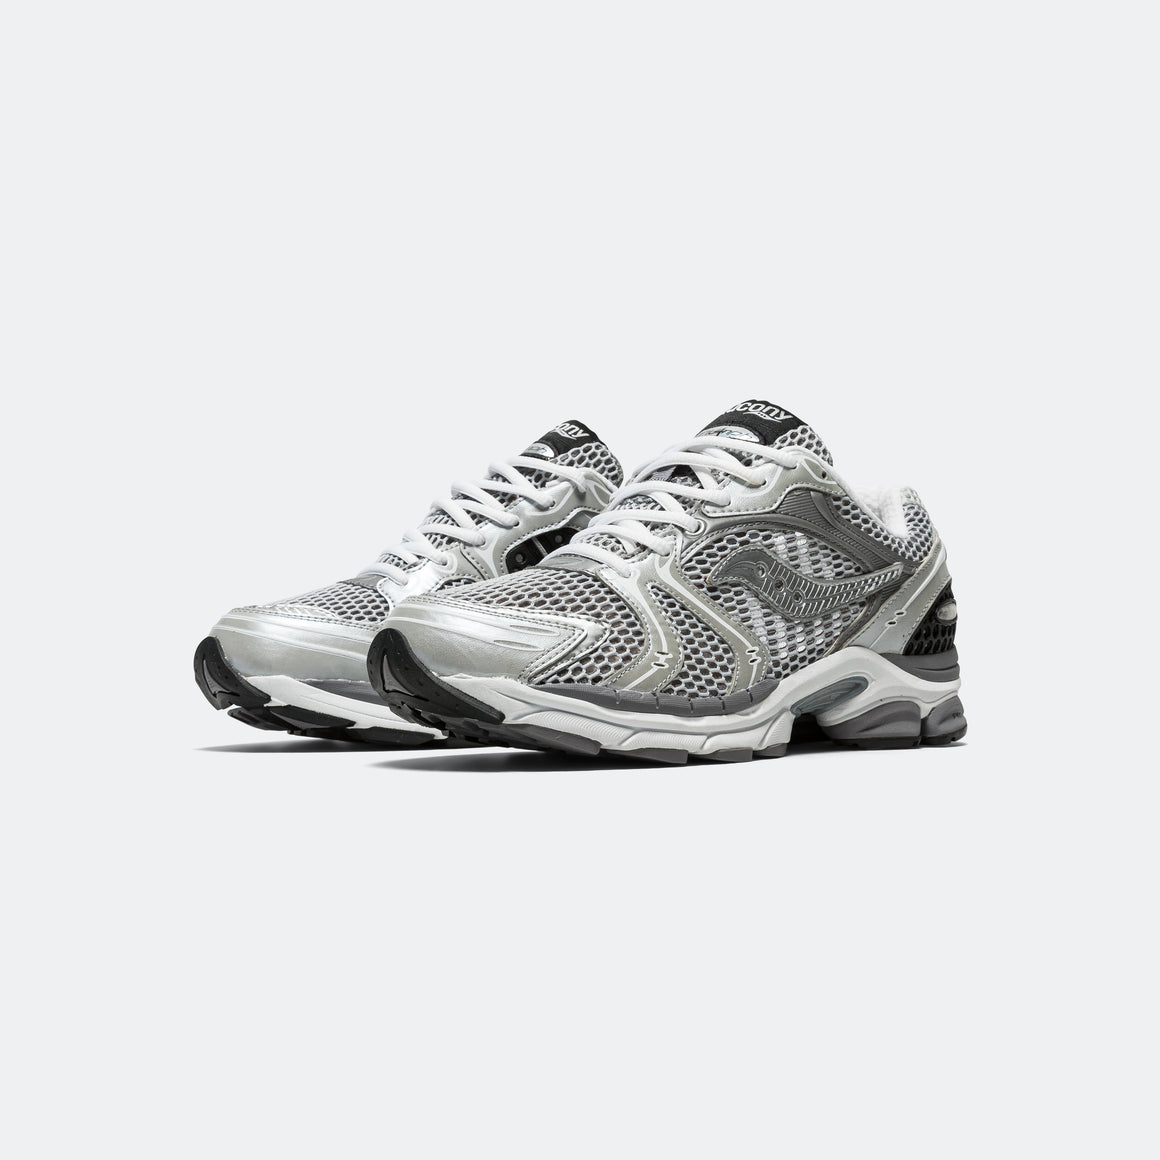 Saucony - ProGrid Triumph 4  - Grey/Silver - UP THERE